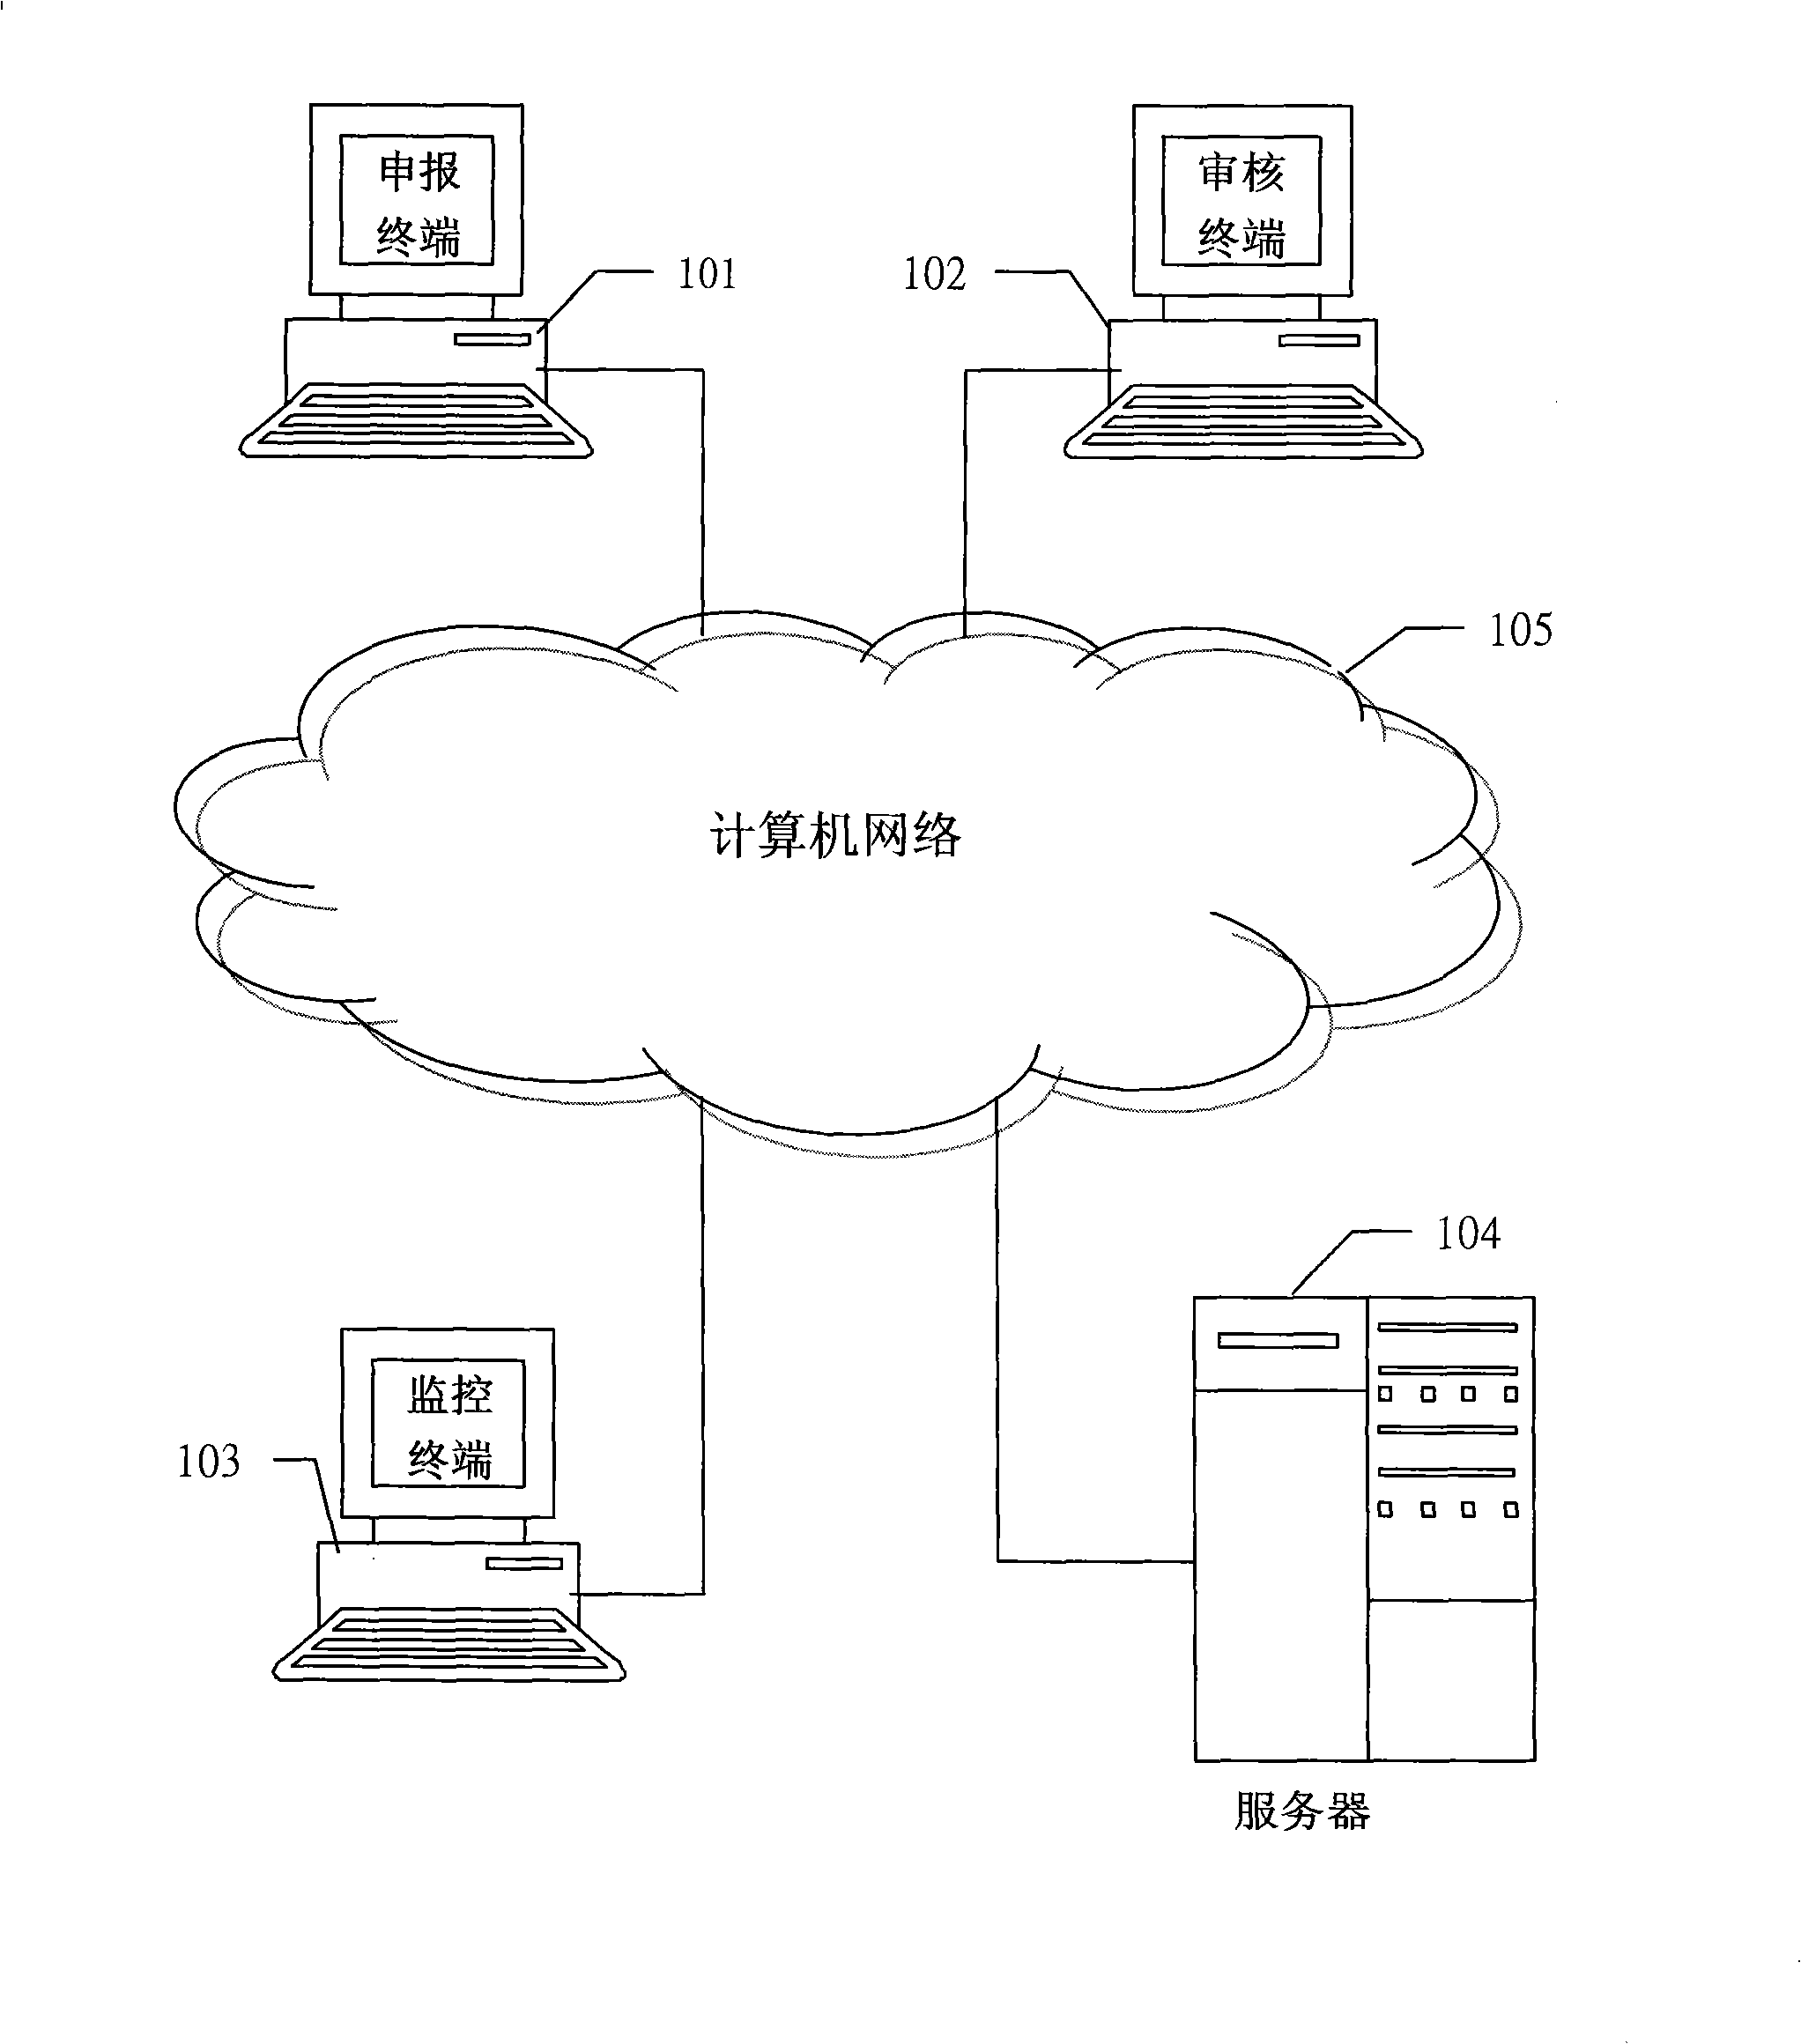 Engineering change charge monitoring system and method